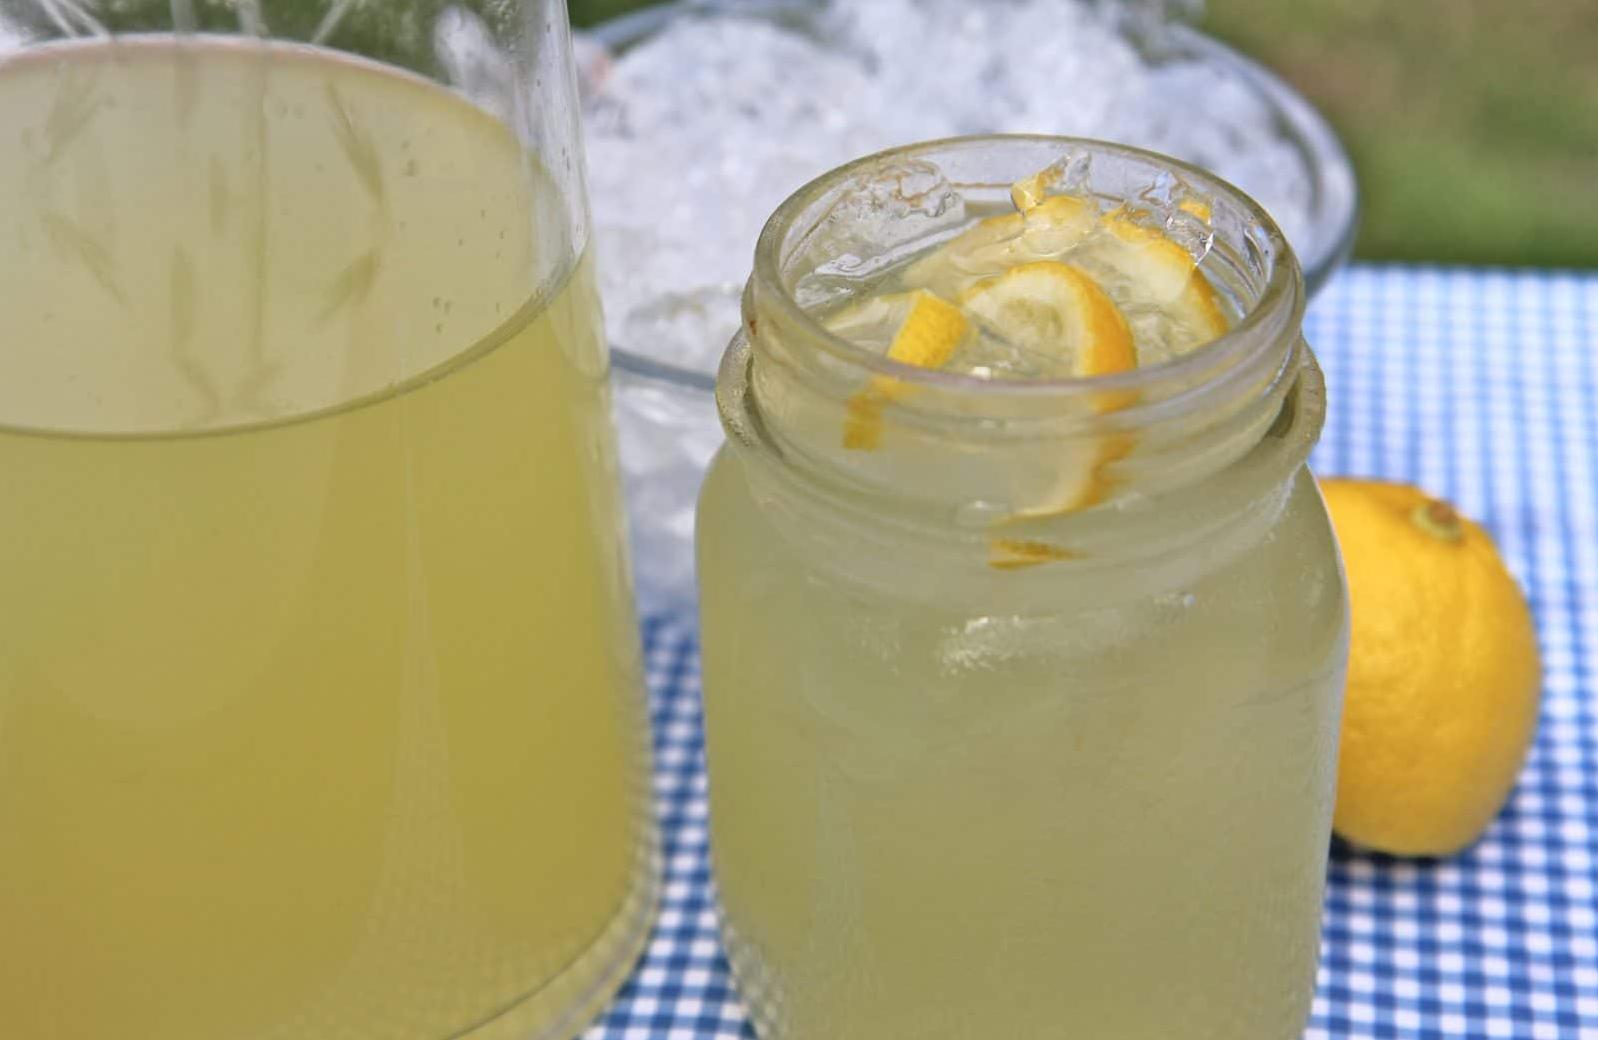  This lemonade recipe is sunshine in a glass!